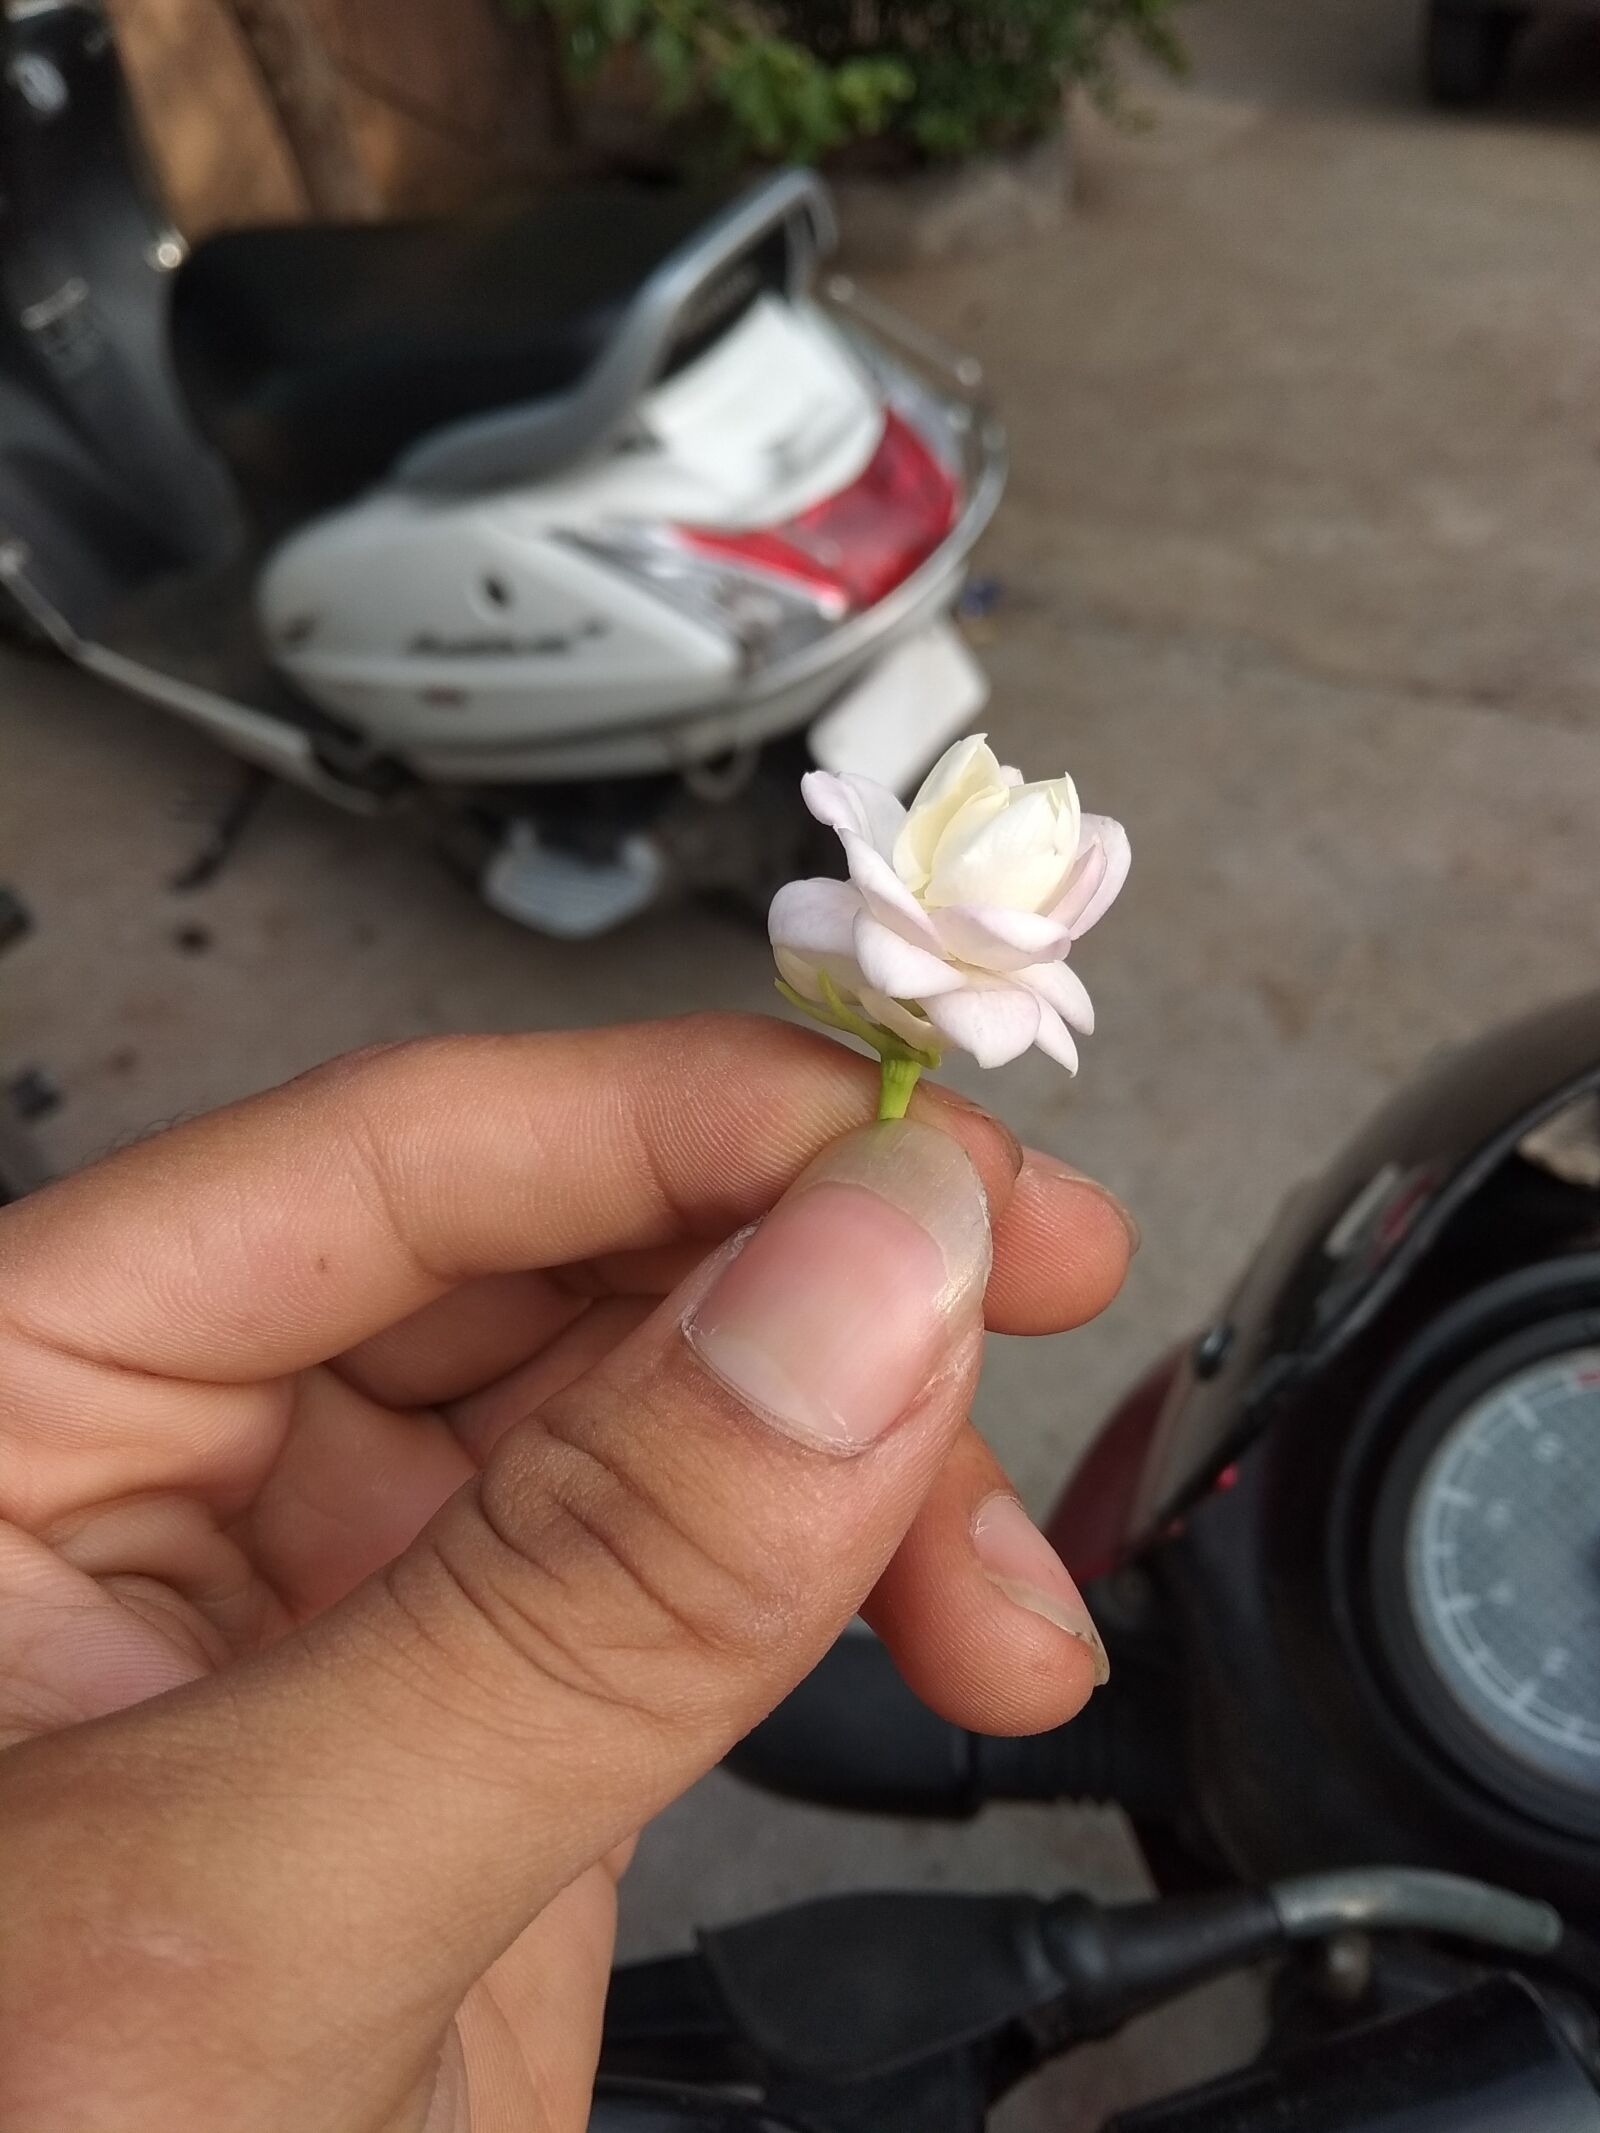 Xiaomi Redmi Note 5A sample photo. Flower, gm, good morning photography